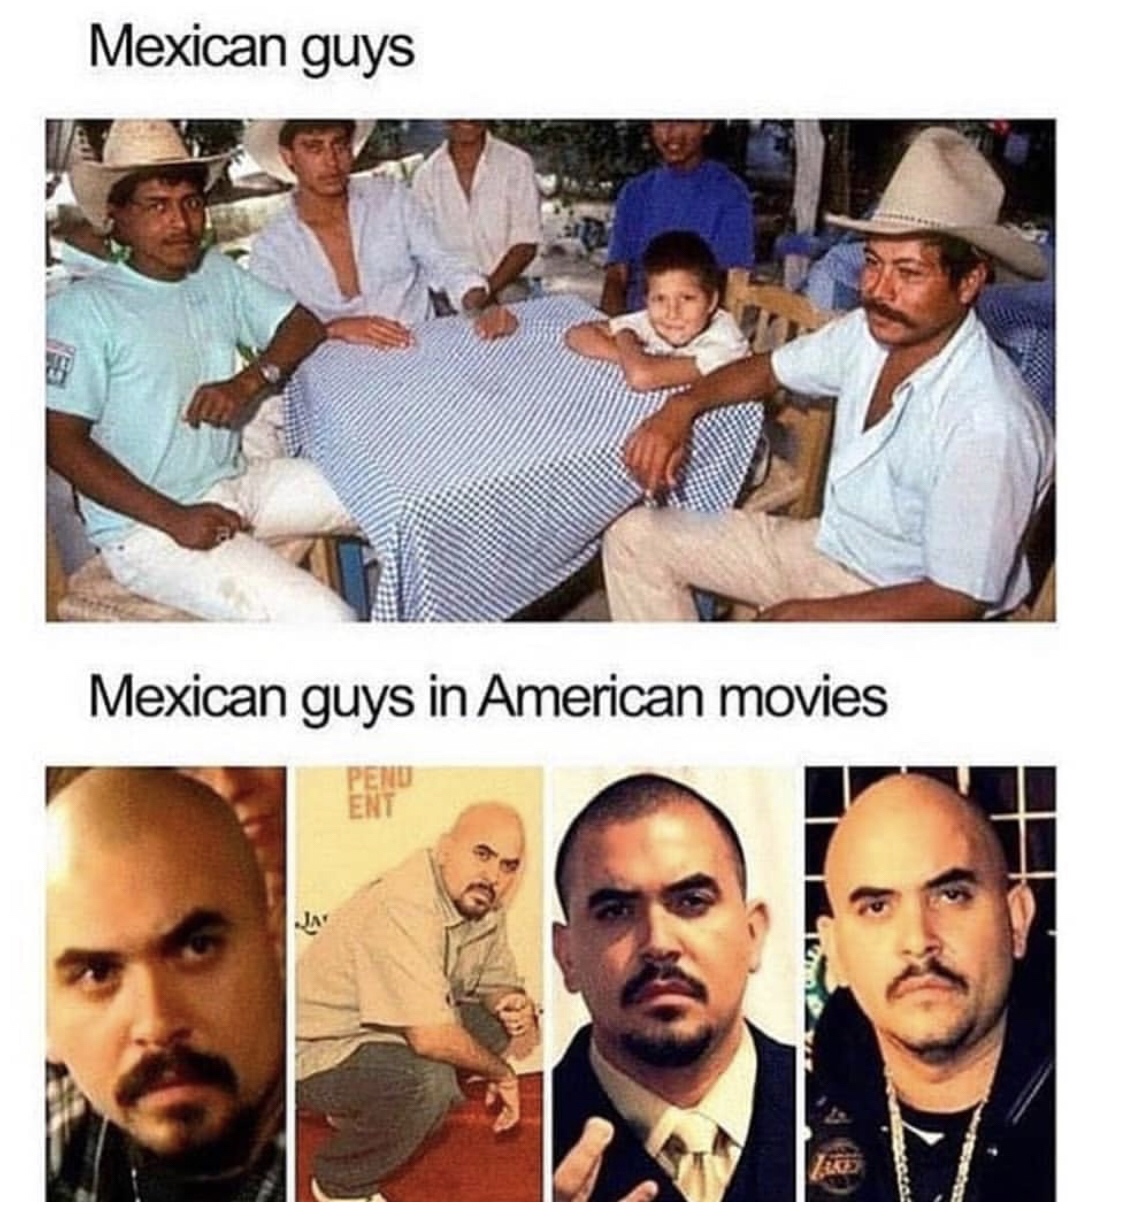 mexico in american movies - Mexican guys Mexican guys in American movies